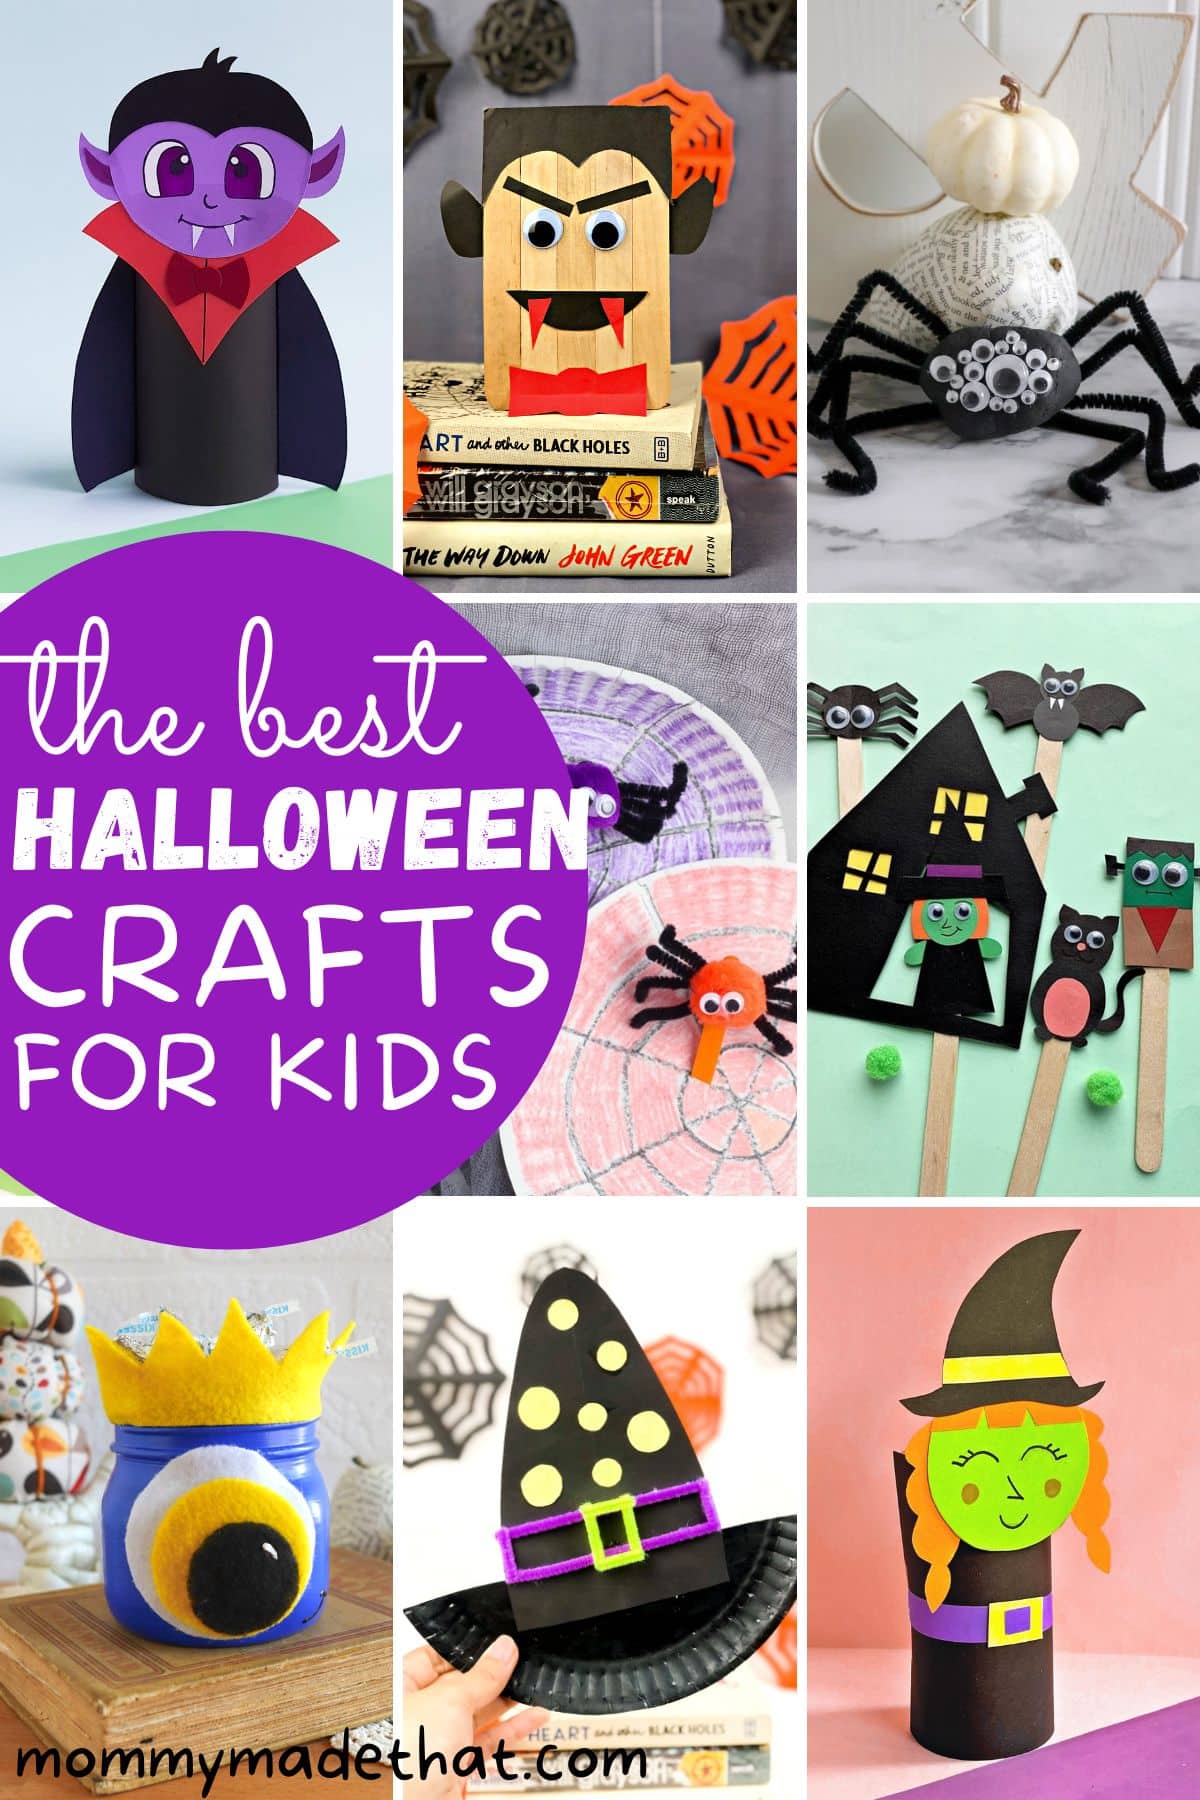 The Best Halloween Crafts for Kids